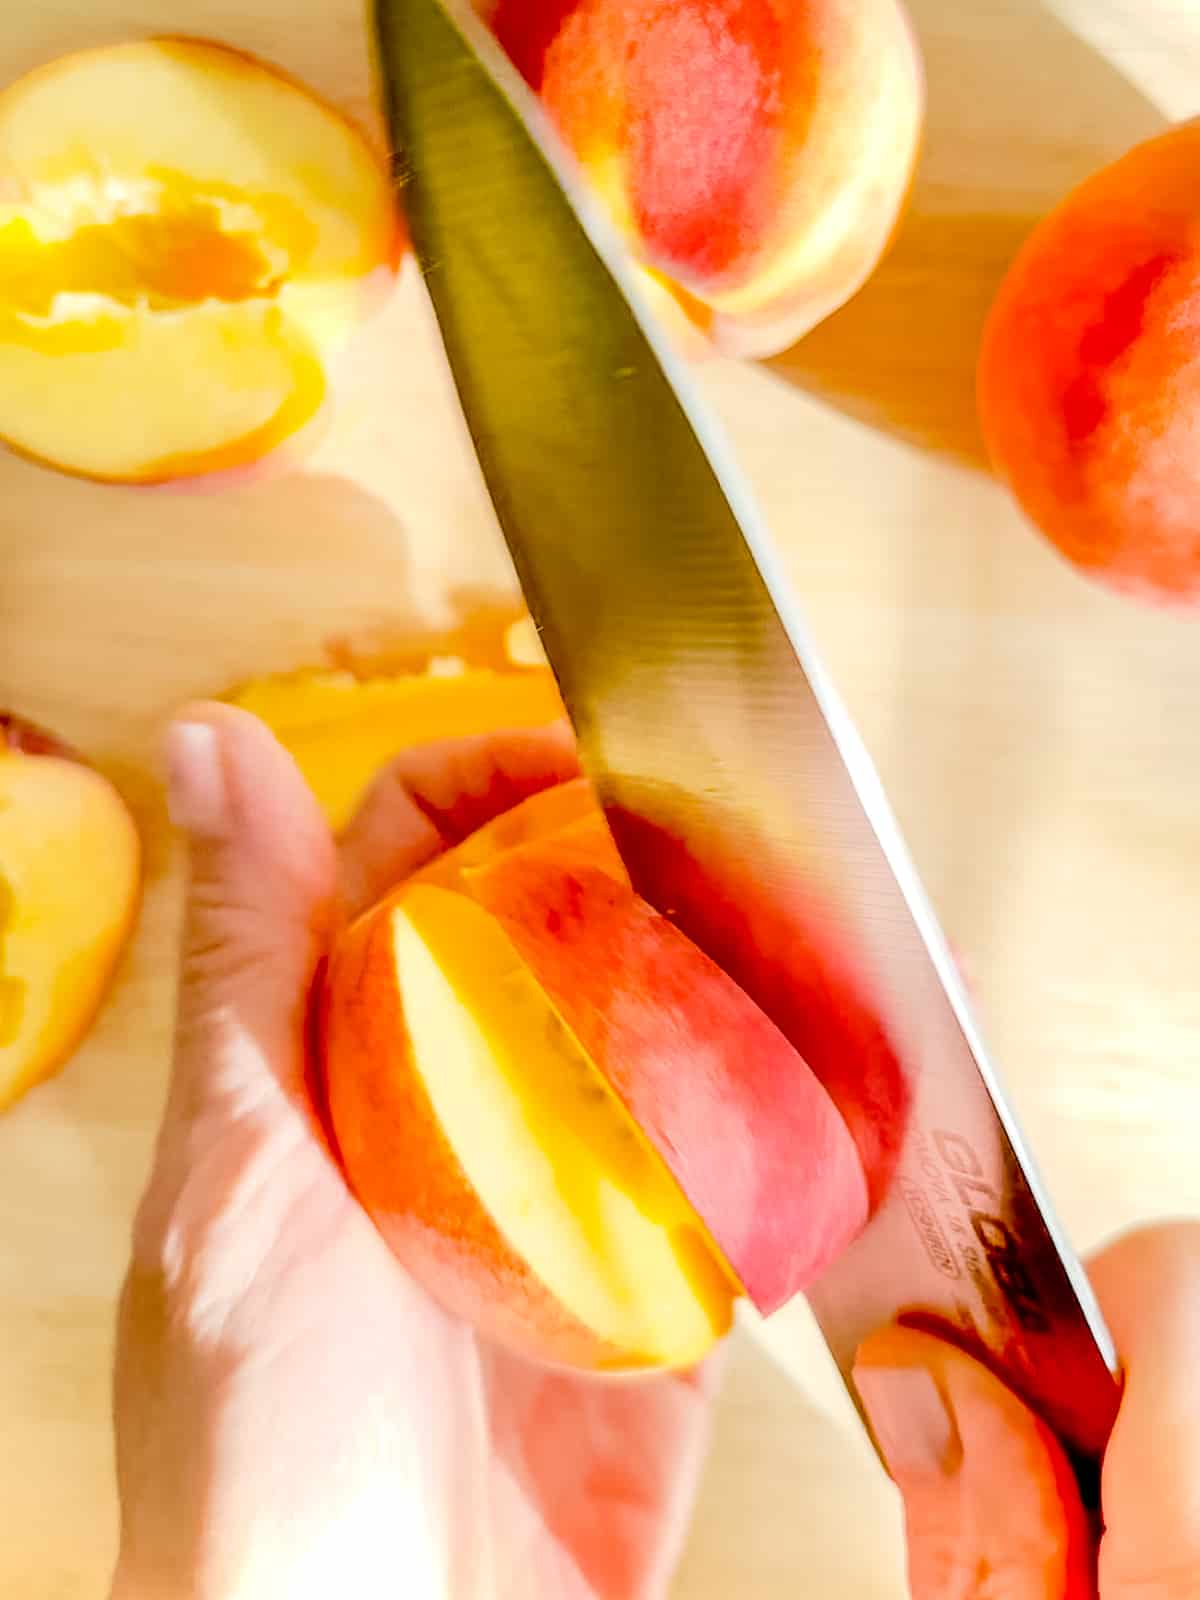 Using a chef's knife to slice a piece of peach off the pit.